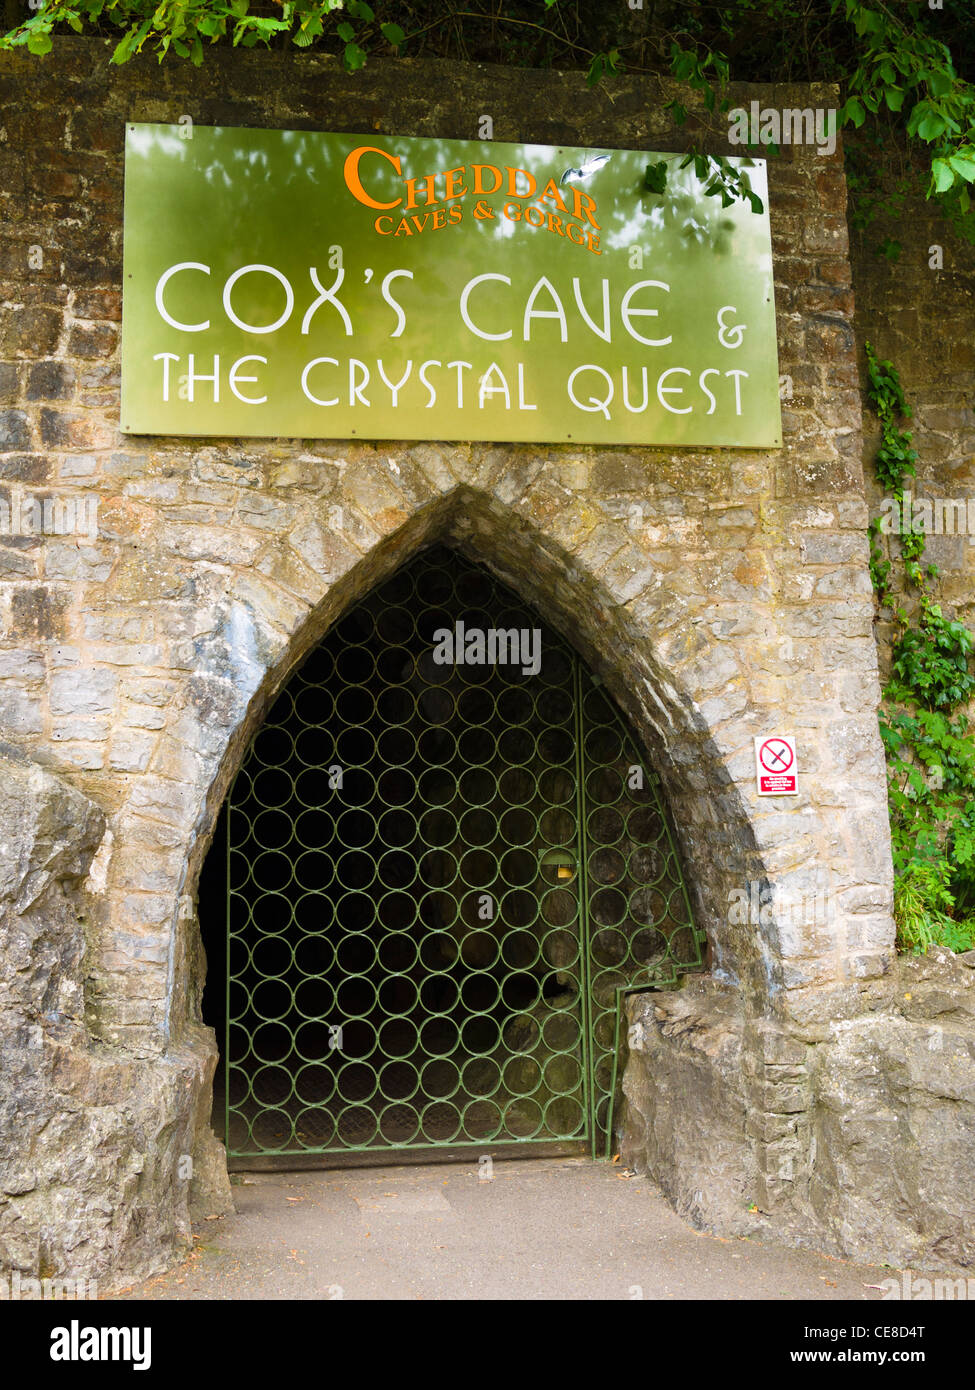 The entrance to Cox's Cave at the tourist attraction Cheddar Gorge, Somerset, England. United Kingdom. Stock Photo